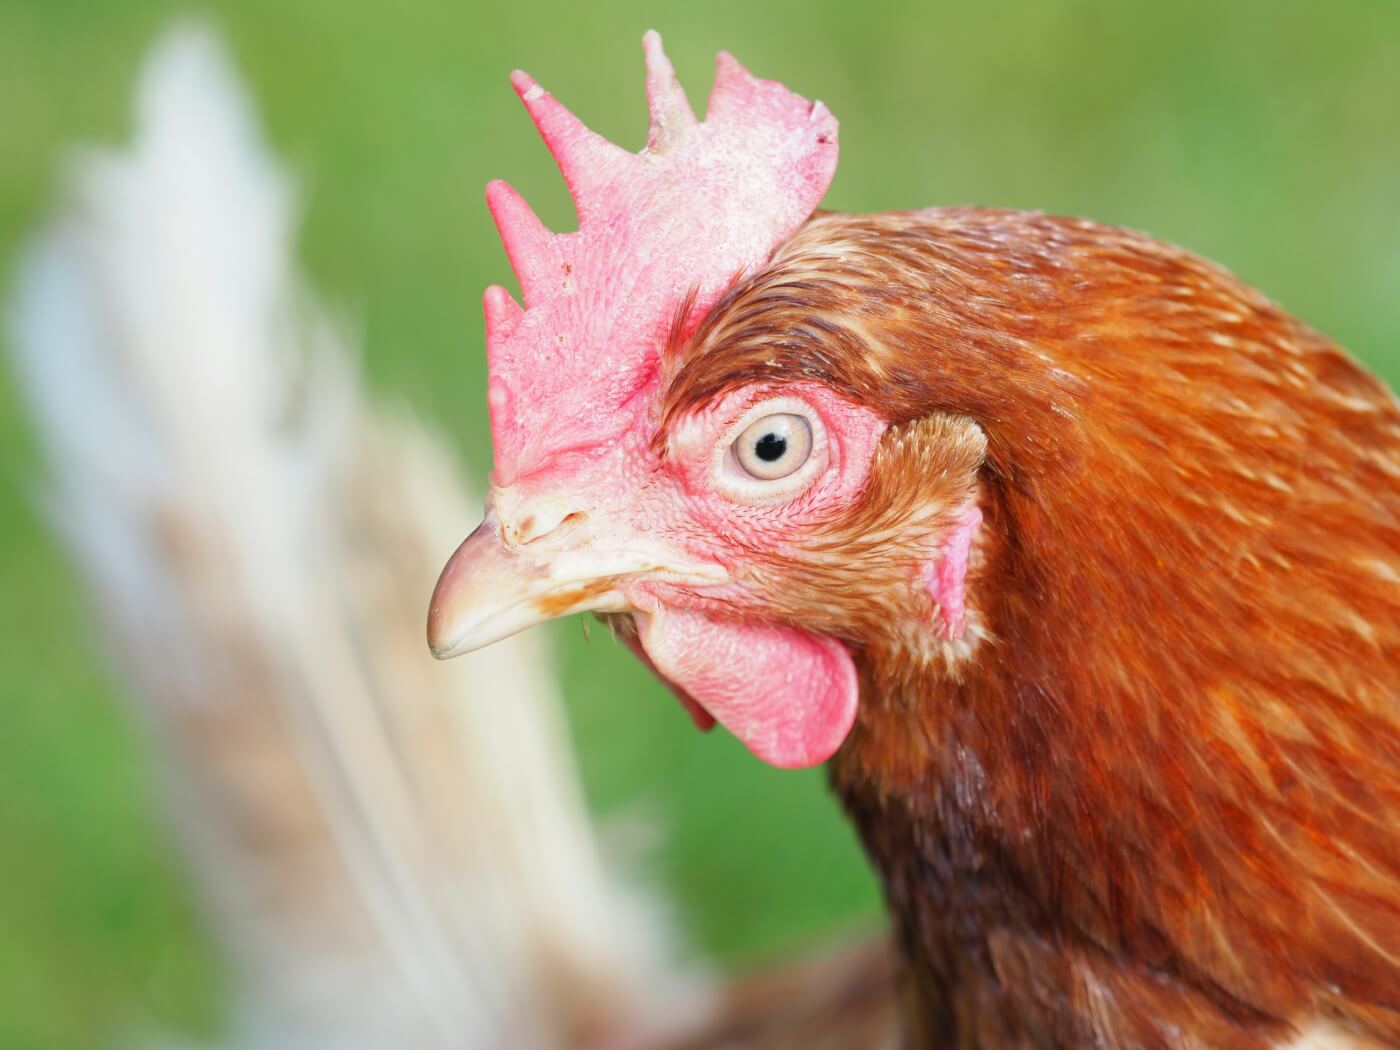 A close up of a brown hen outside